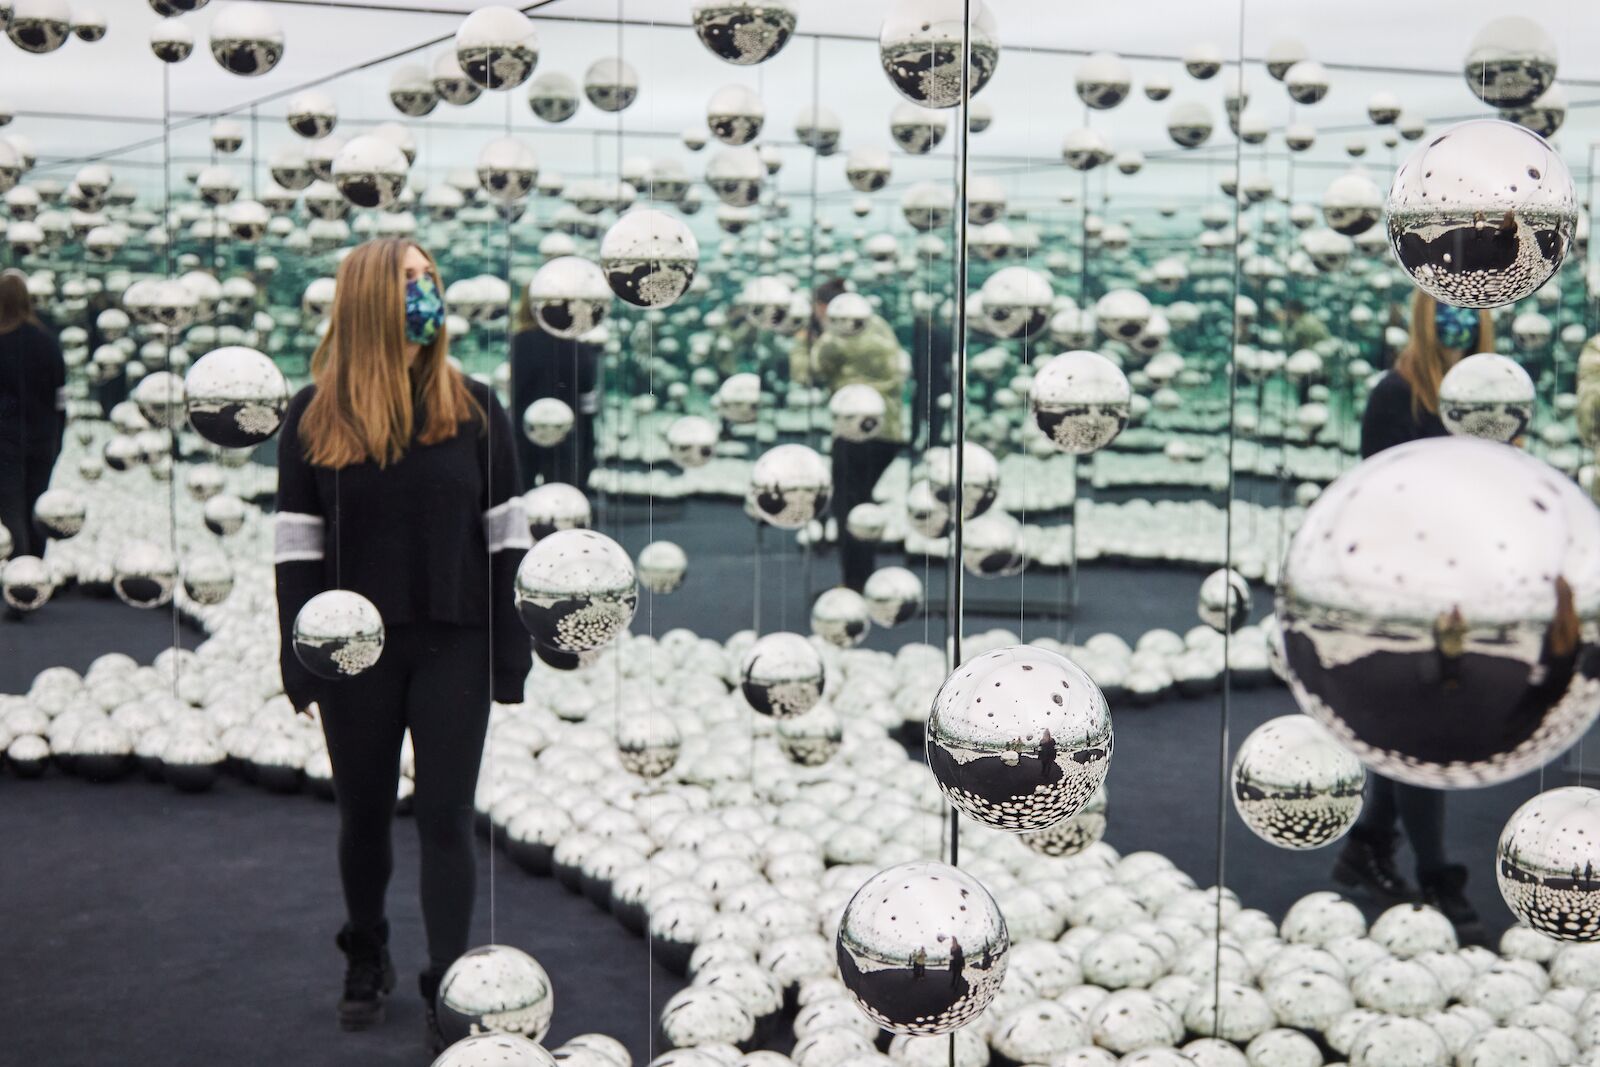 Yayoi Kusama's Infinity Room at the WNDR Museum in Chicago